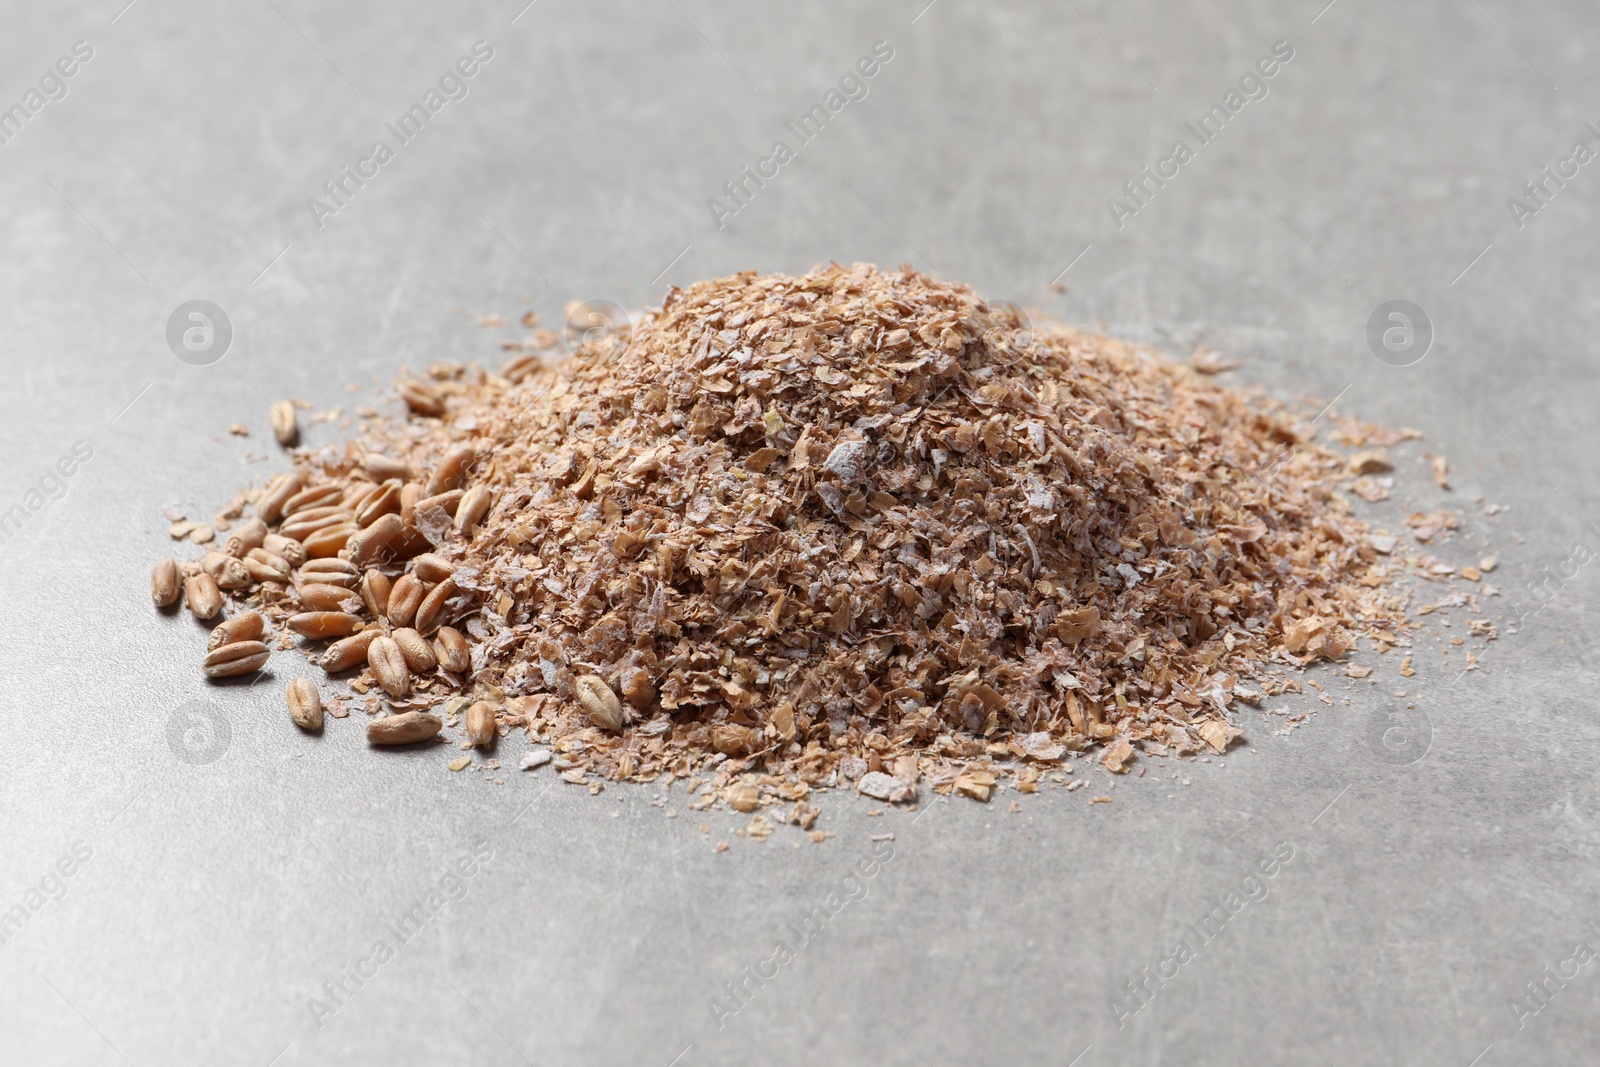 Photo of Pile of wheat bran on grey table